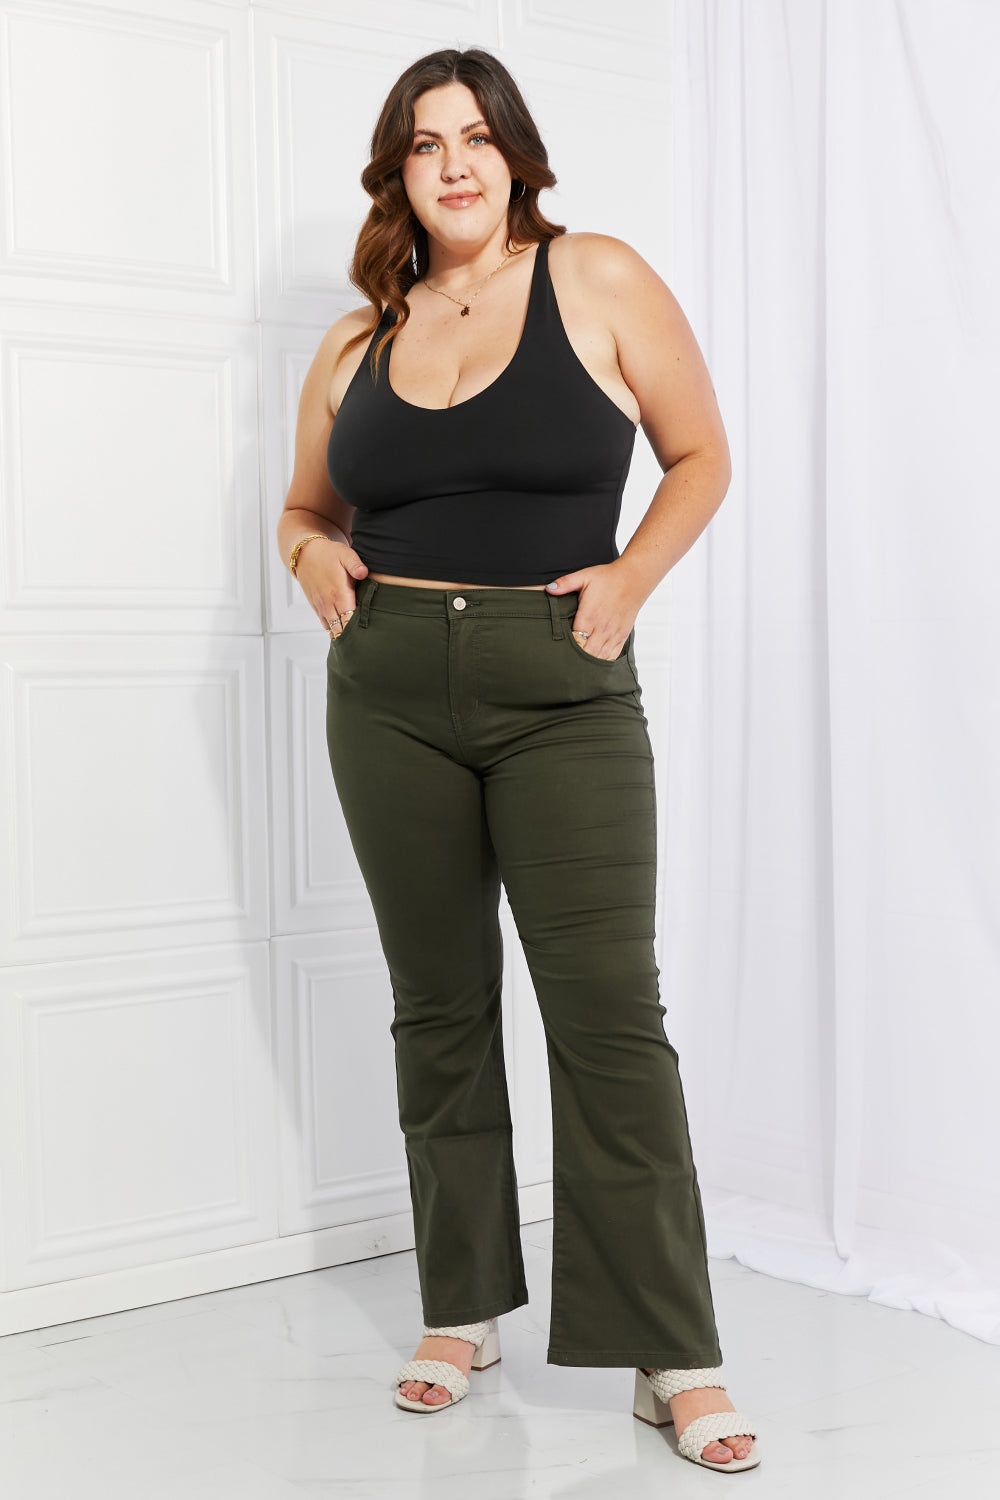 Zenana Clementine Full Size High-Rise Bootcut Pants in Dark Olive | Pants - CHANELIA